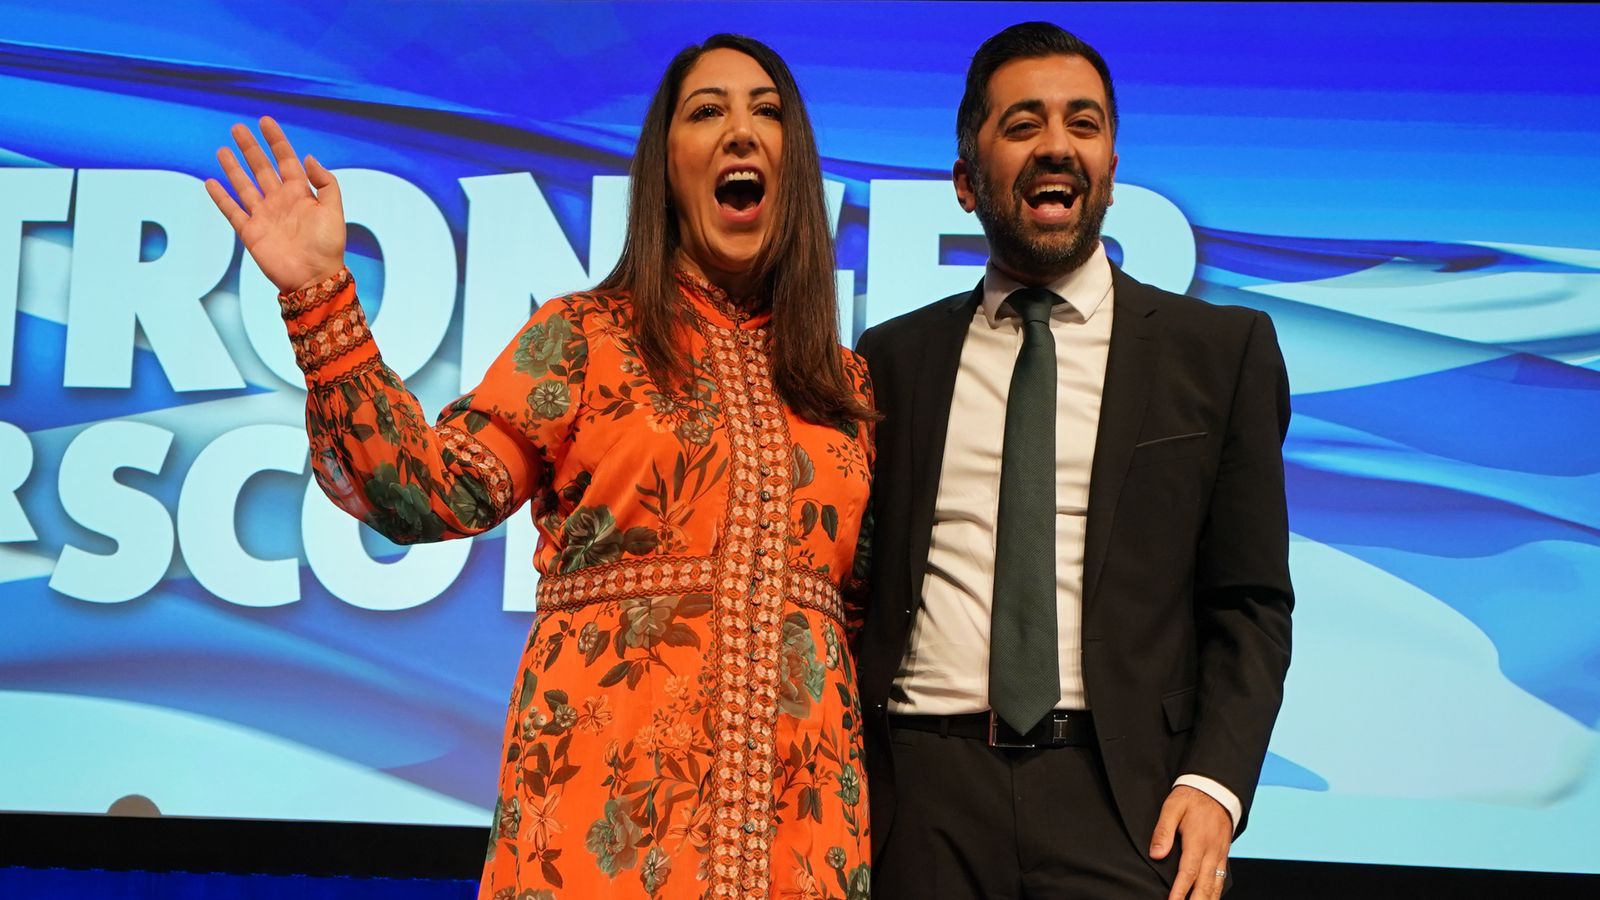 Scotland's First Minister Humza Yousaf and wife Nadia El-Nakla expecting a baby this summer